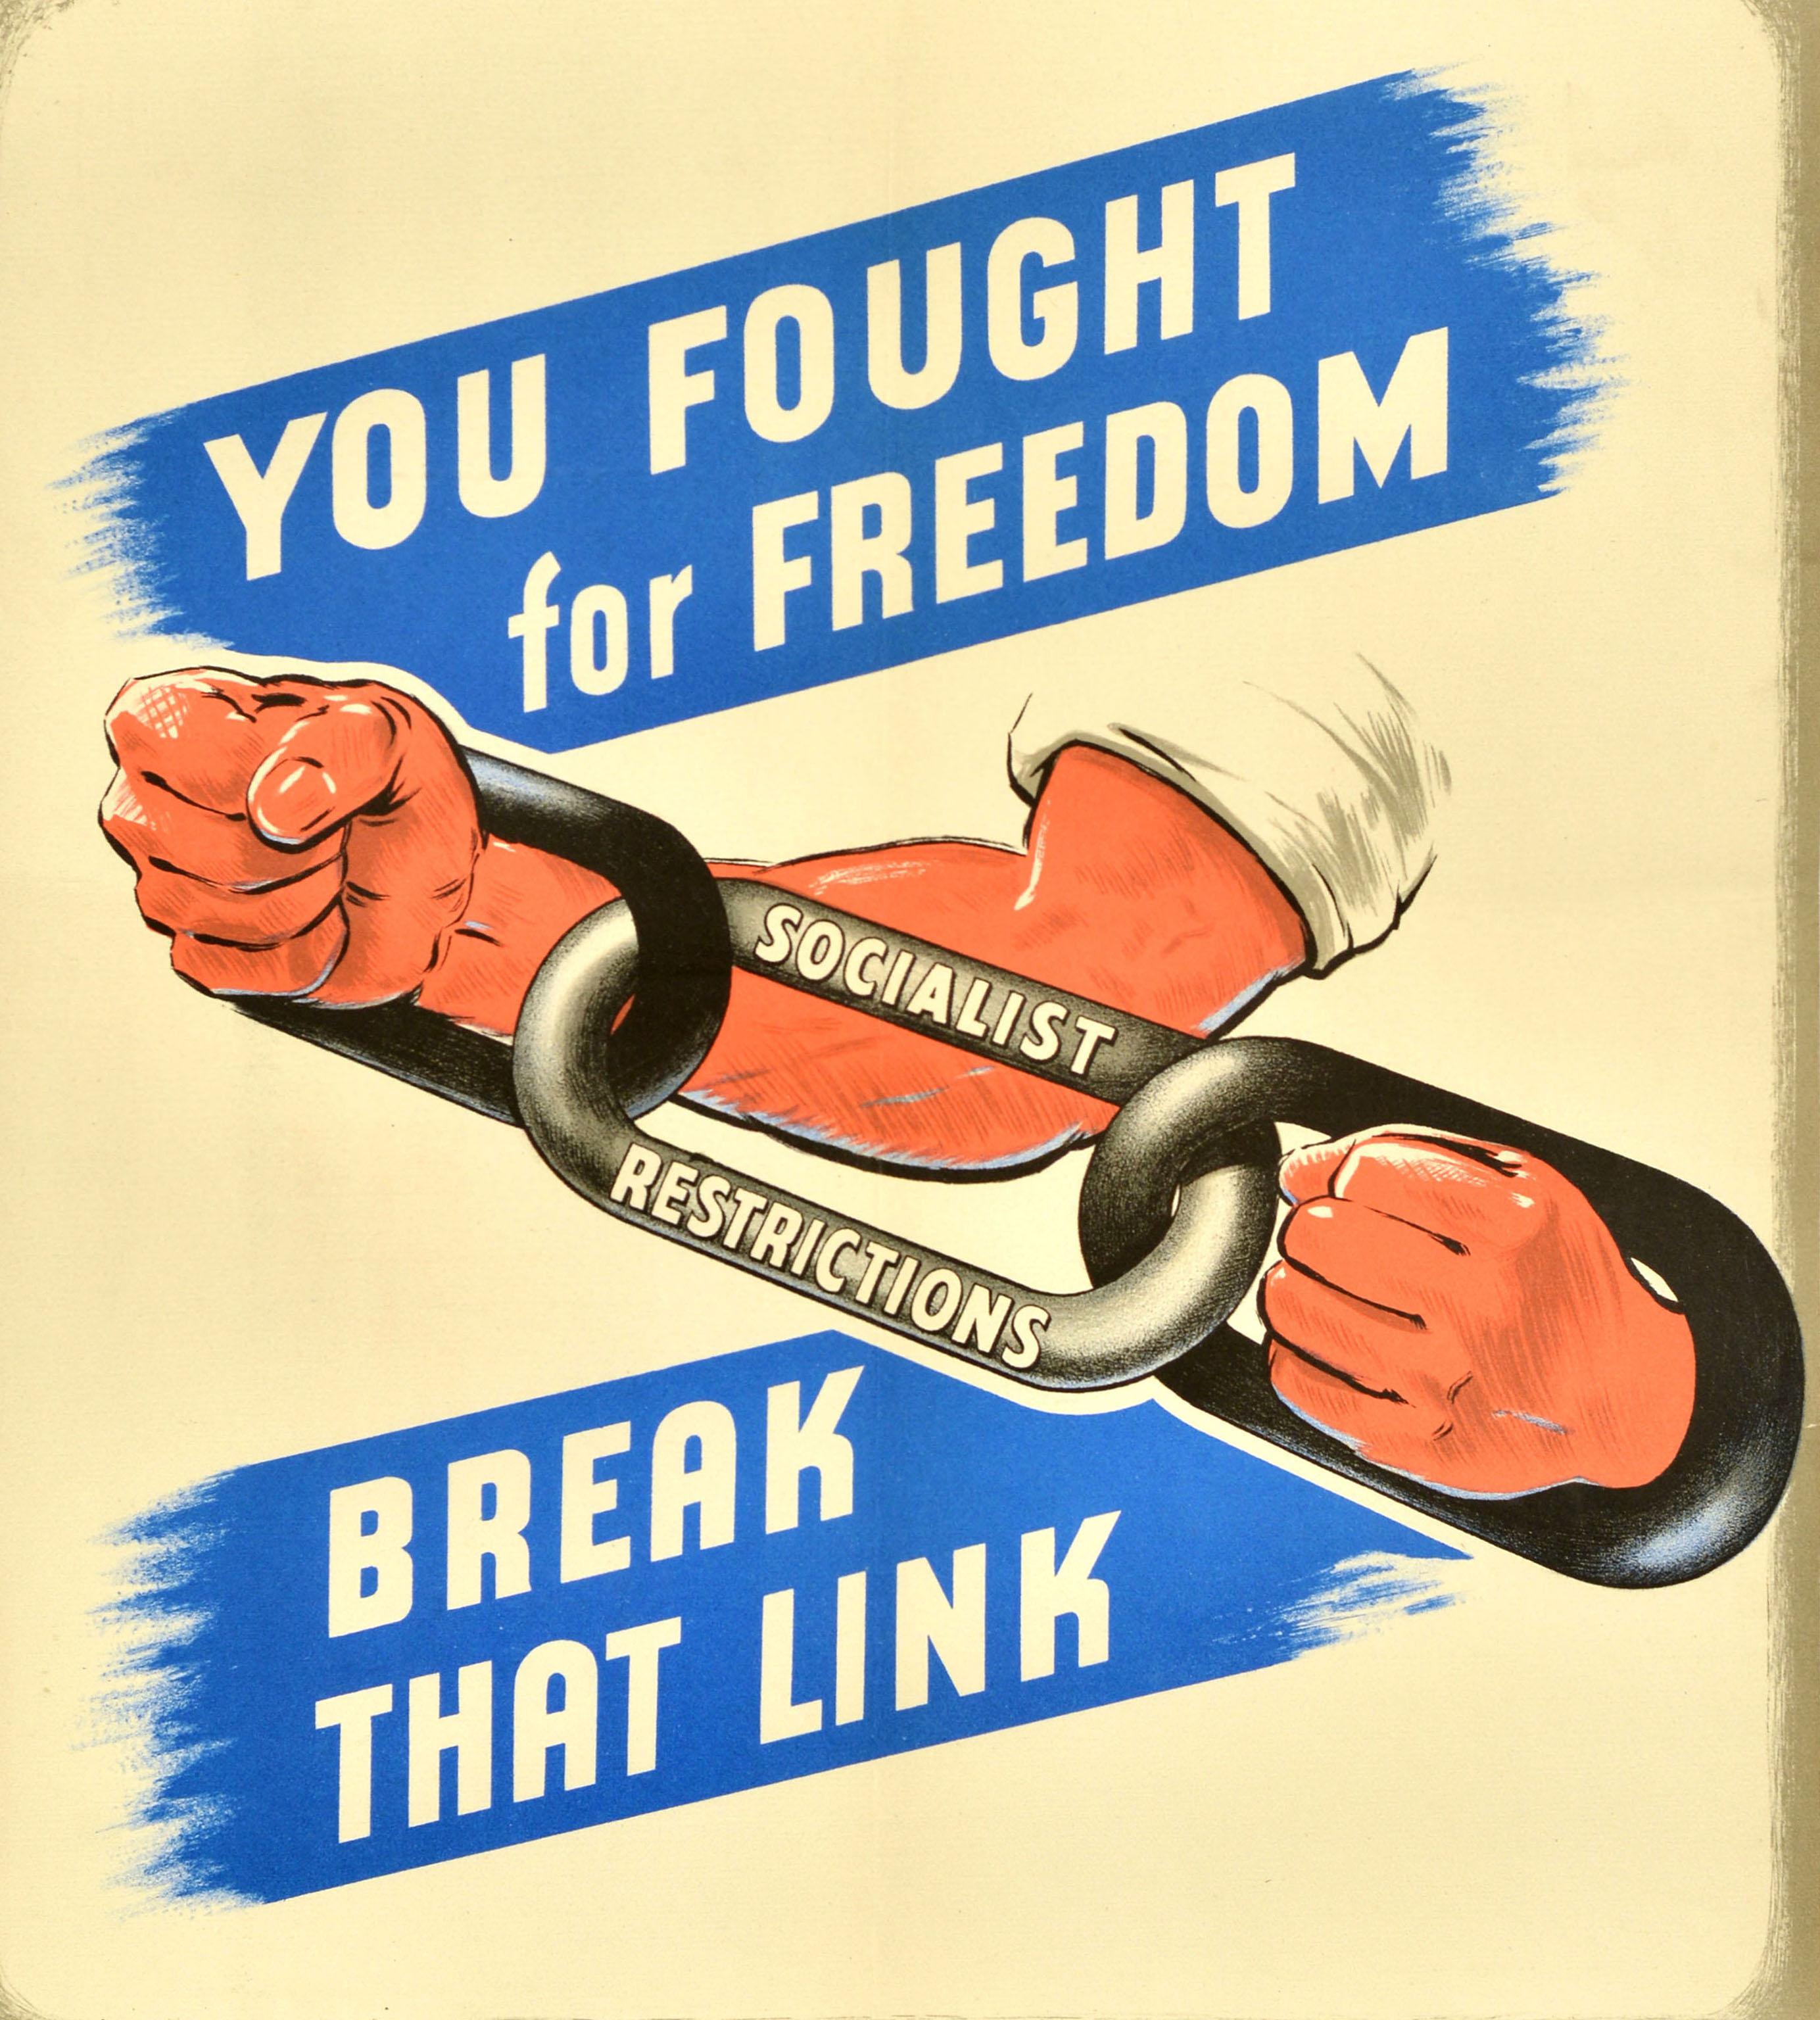 Original vintage London County Council poster - LCC Election Thursday 7 March You fought for freedom Break that link Vote Conservative - featuring an illustration of hands in chains with Socialist Restrictions written on one of the links between the